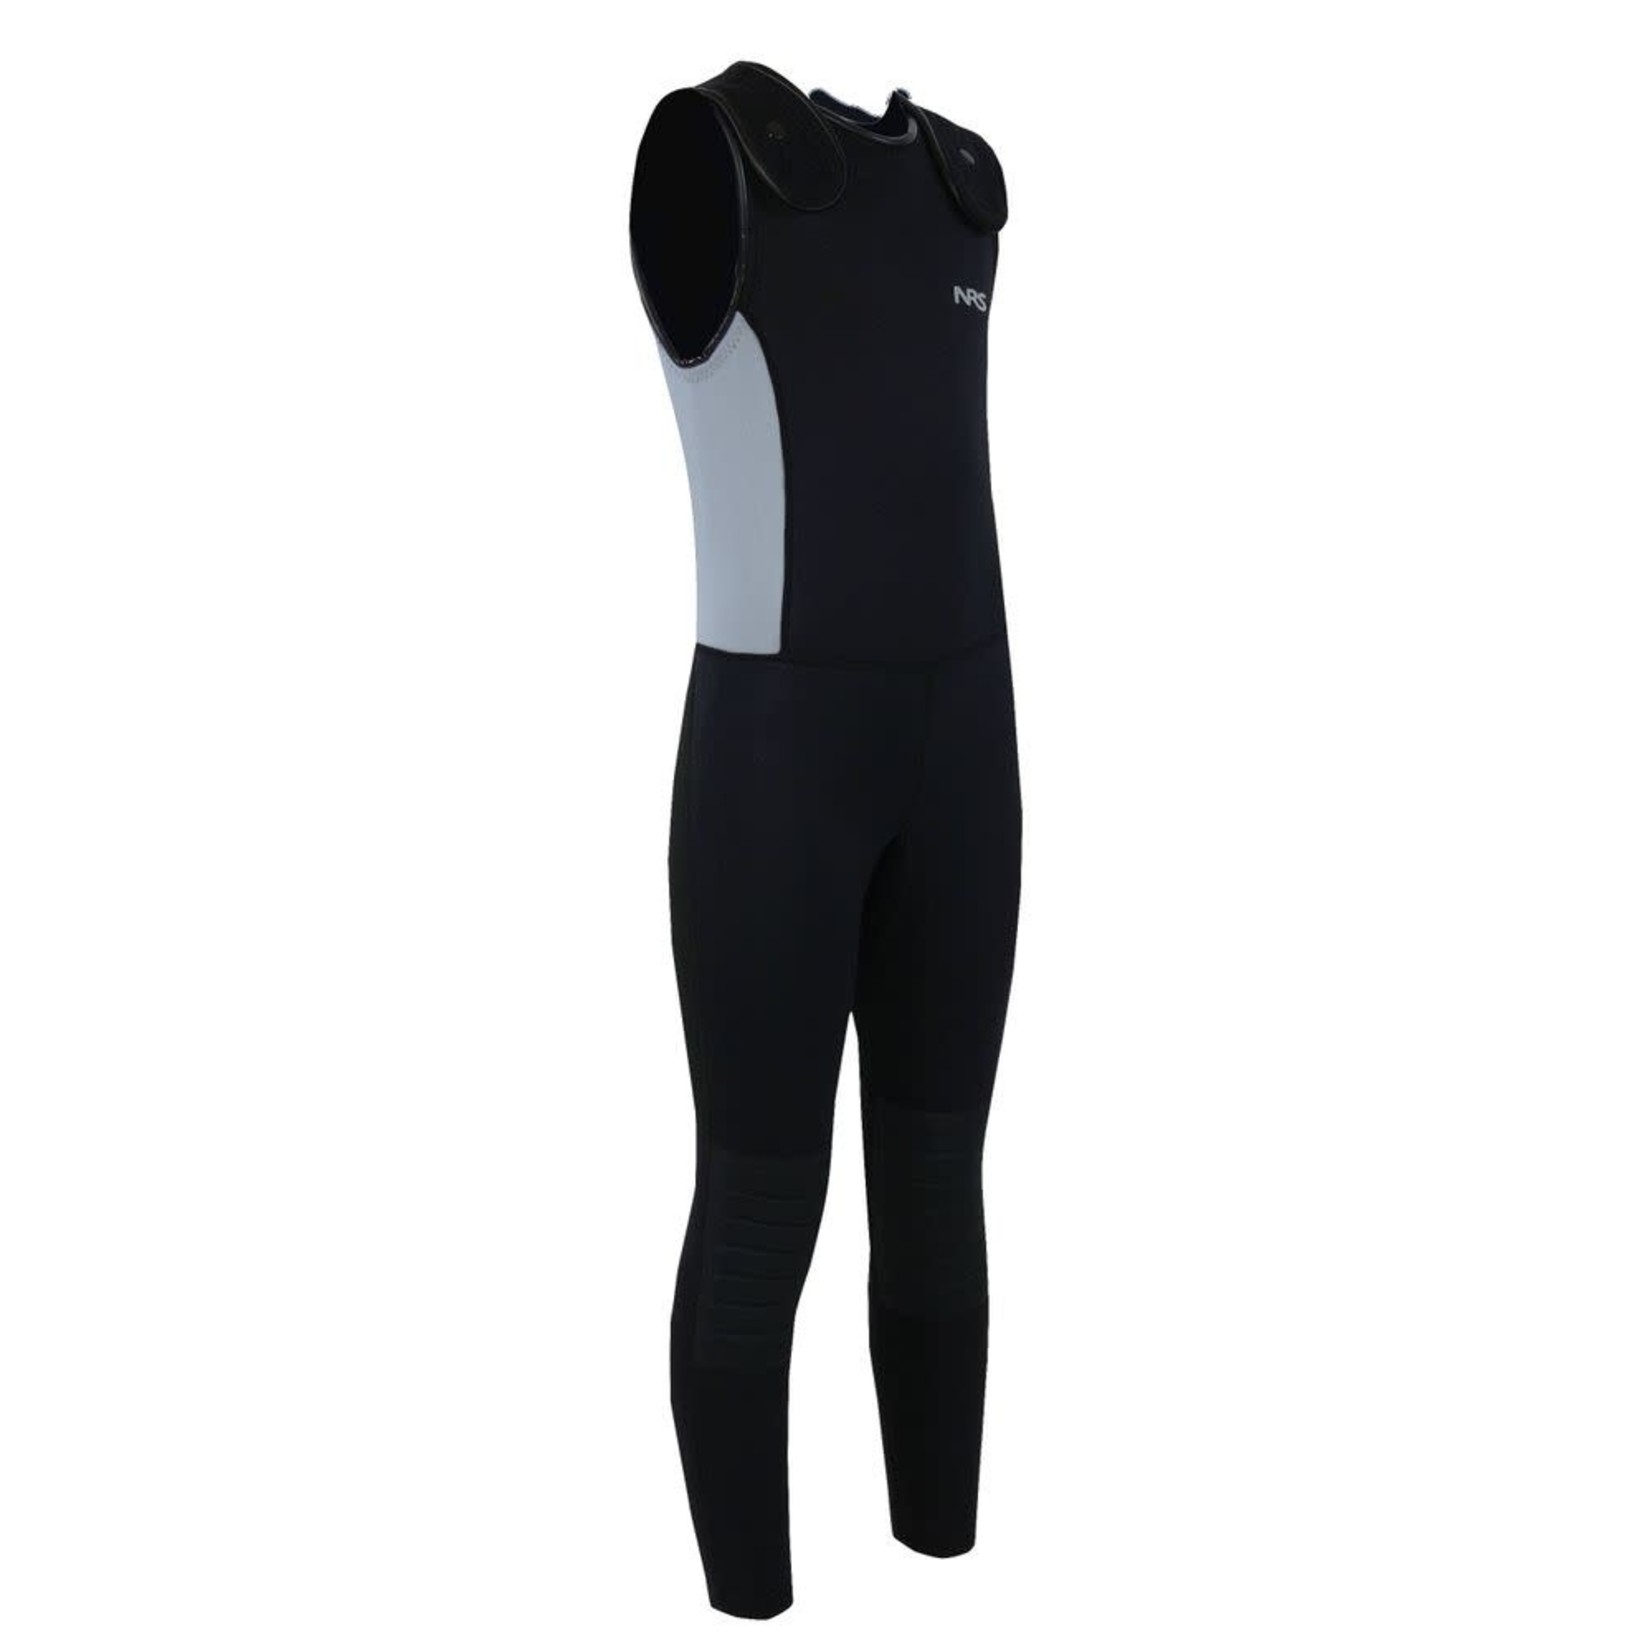 NRS NRS Youth Farmer Bill Wetsuit